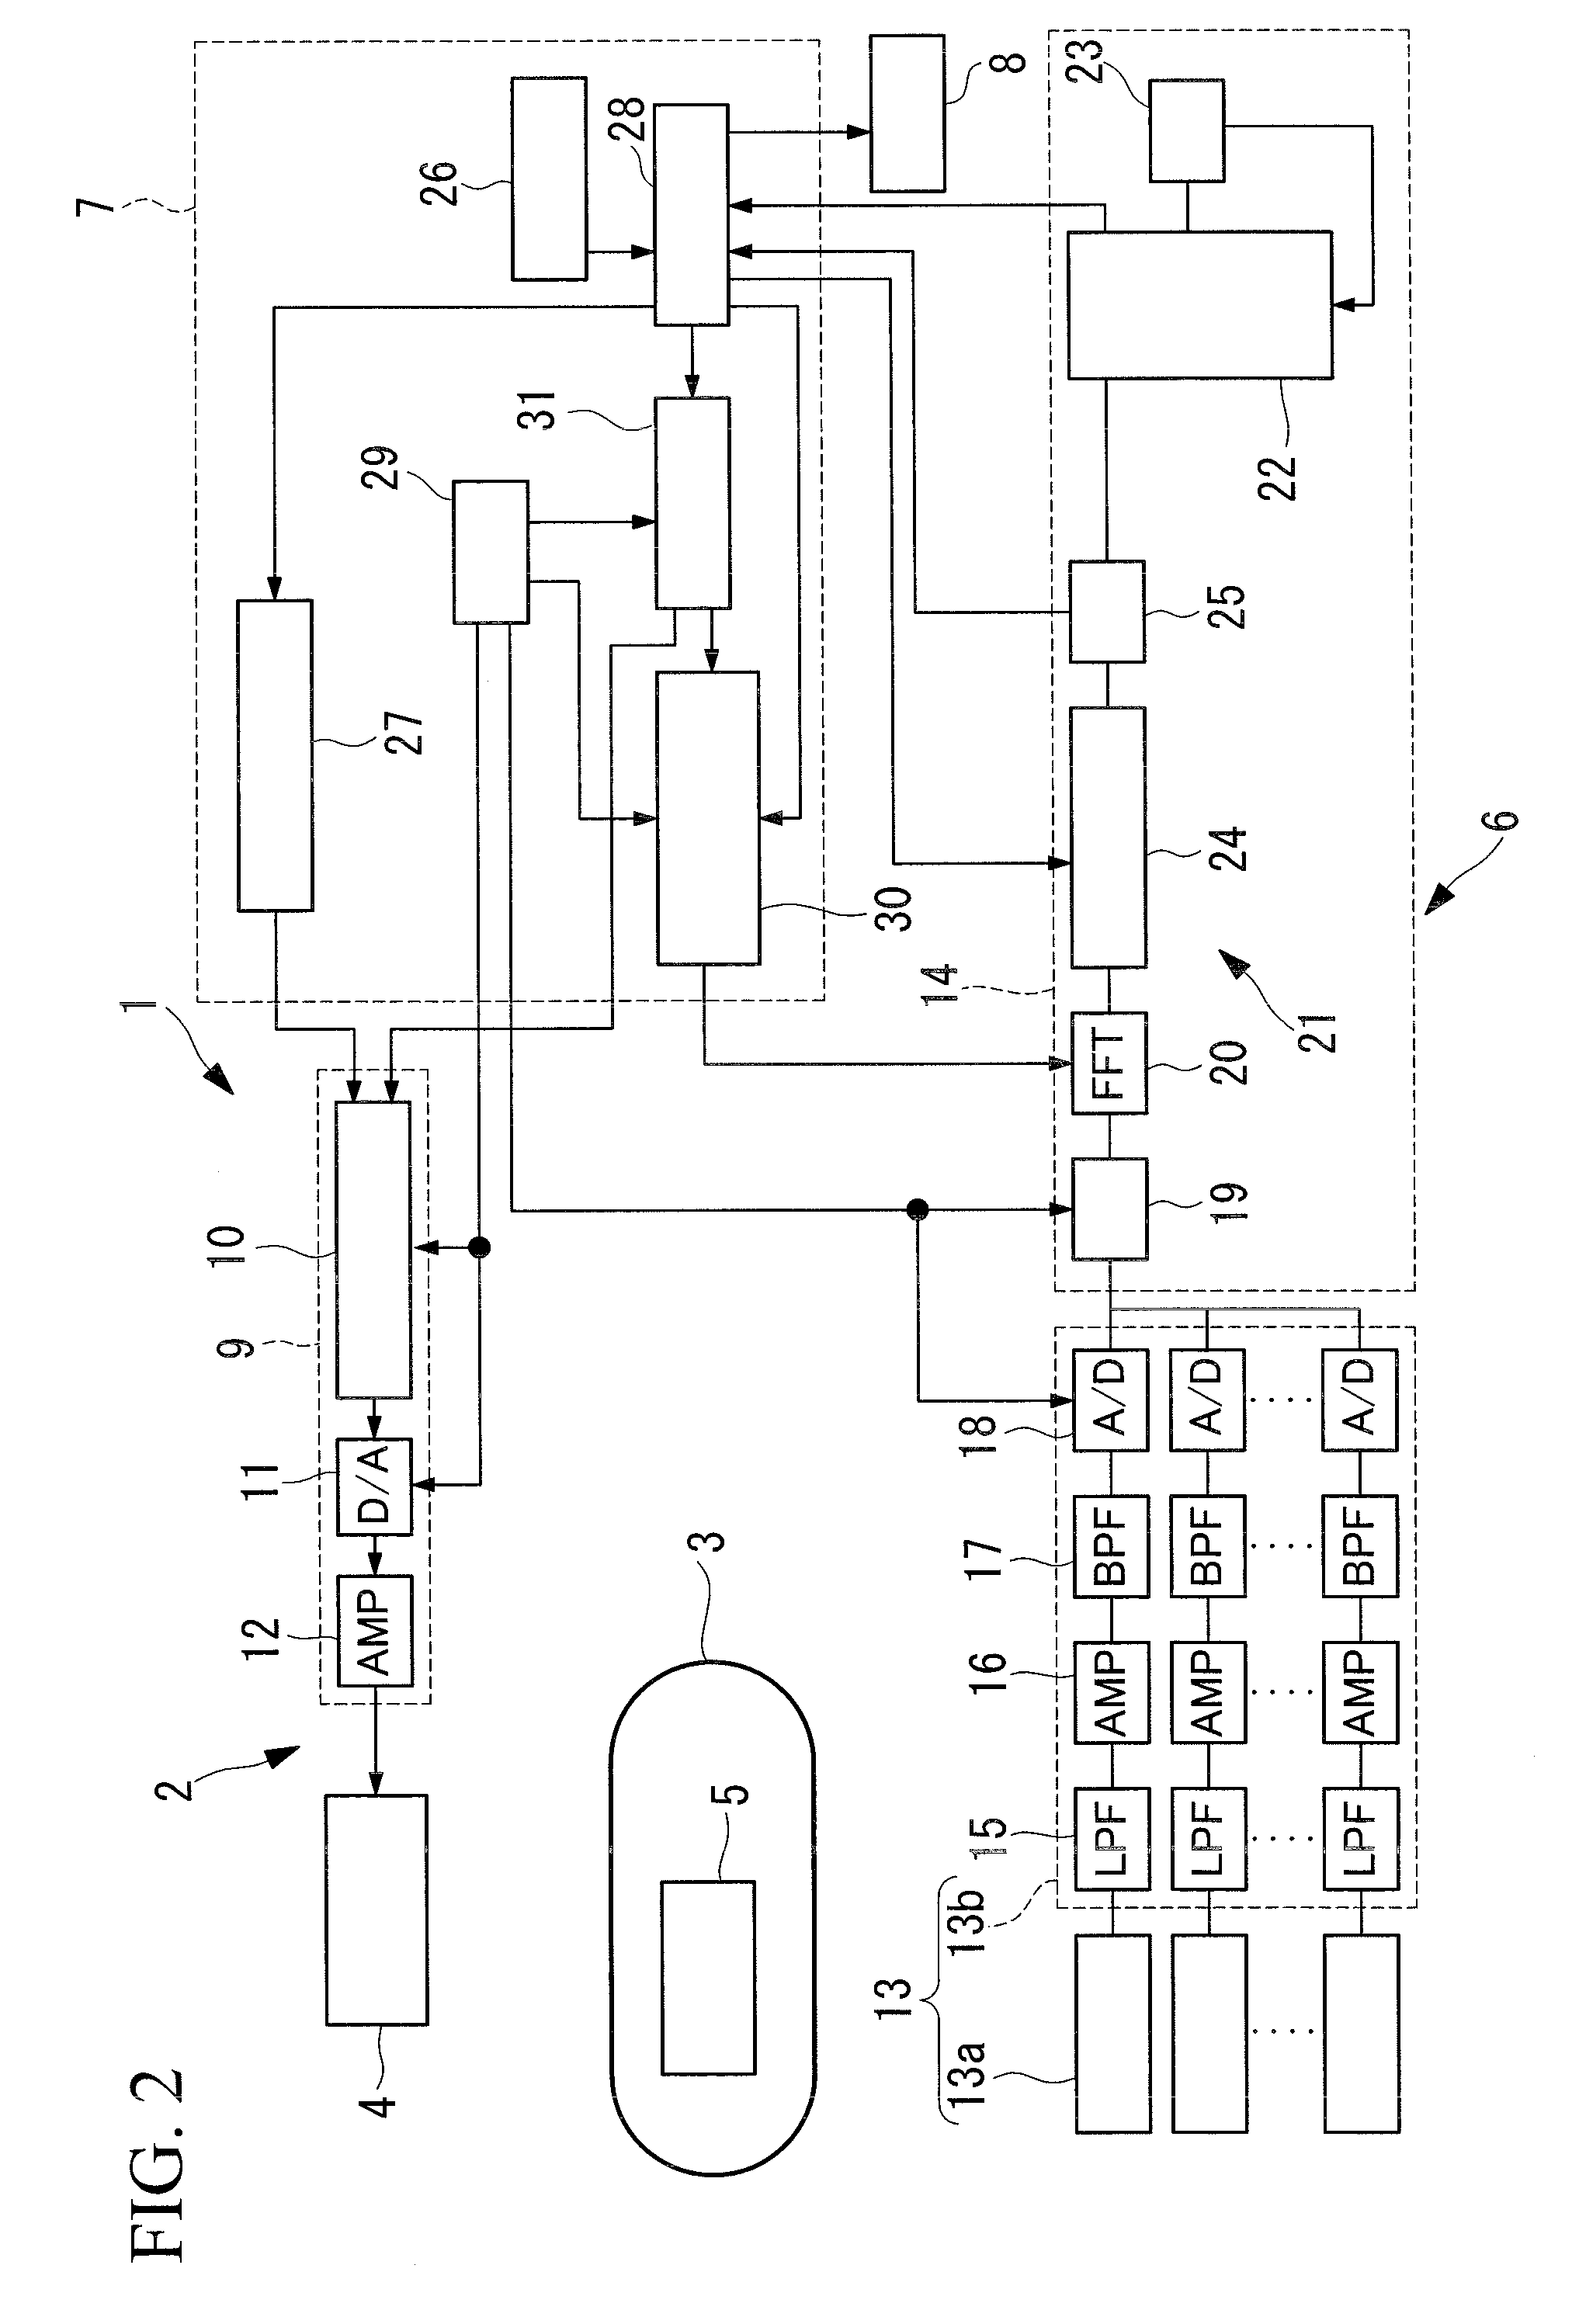 Position detection system, medical-device guidance system, and position detection method